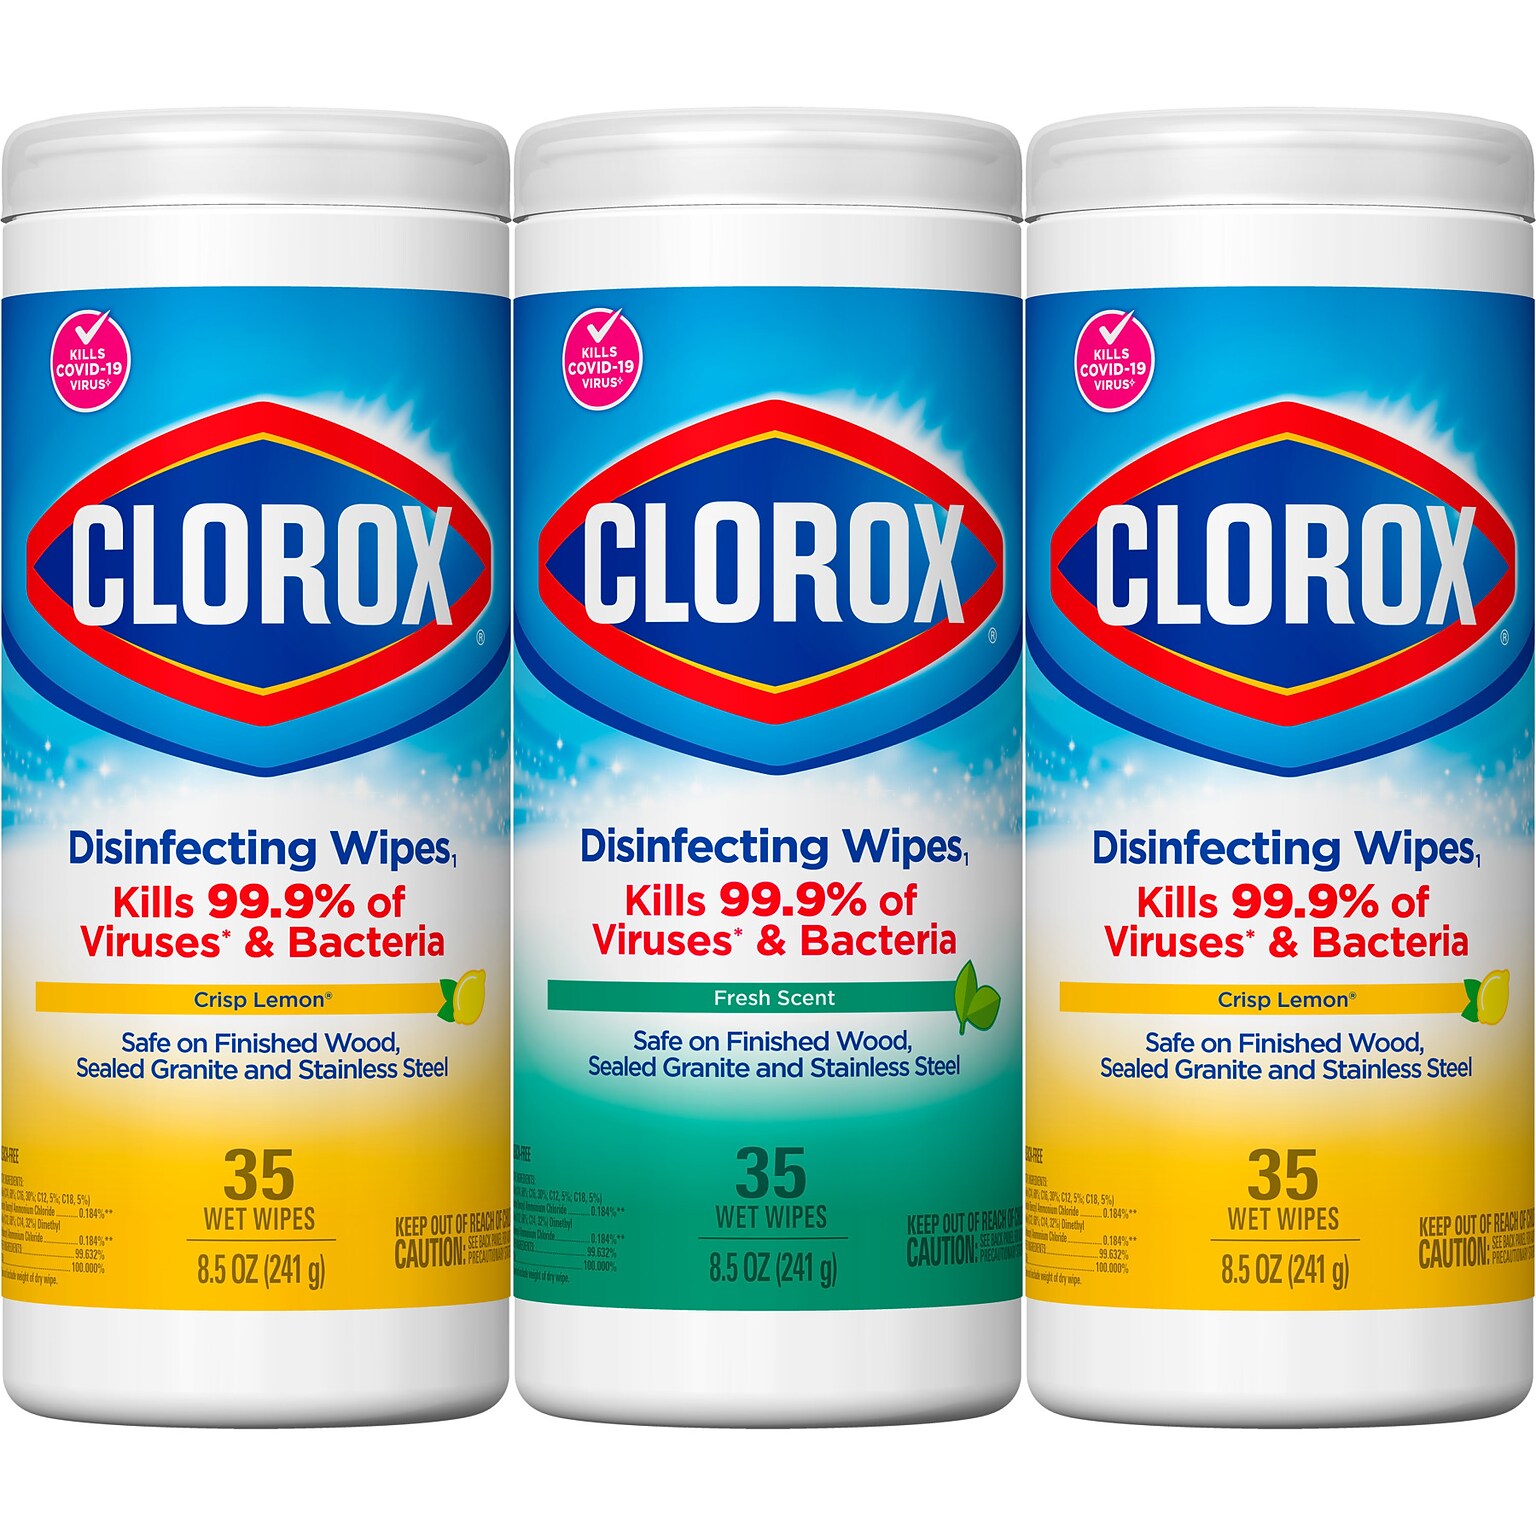 Clorox Disinfecting Wipes Value Pack, Bleach Free Cleaning Wipes - 105 Wipes (30112)